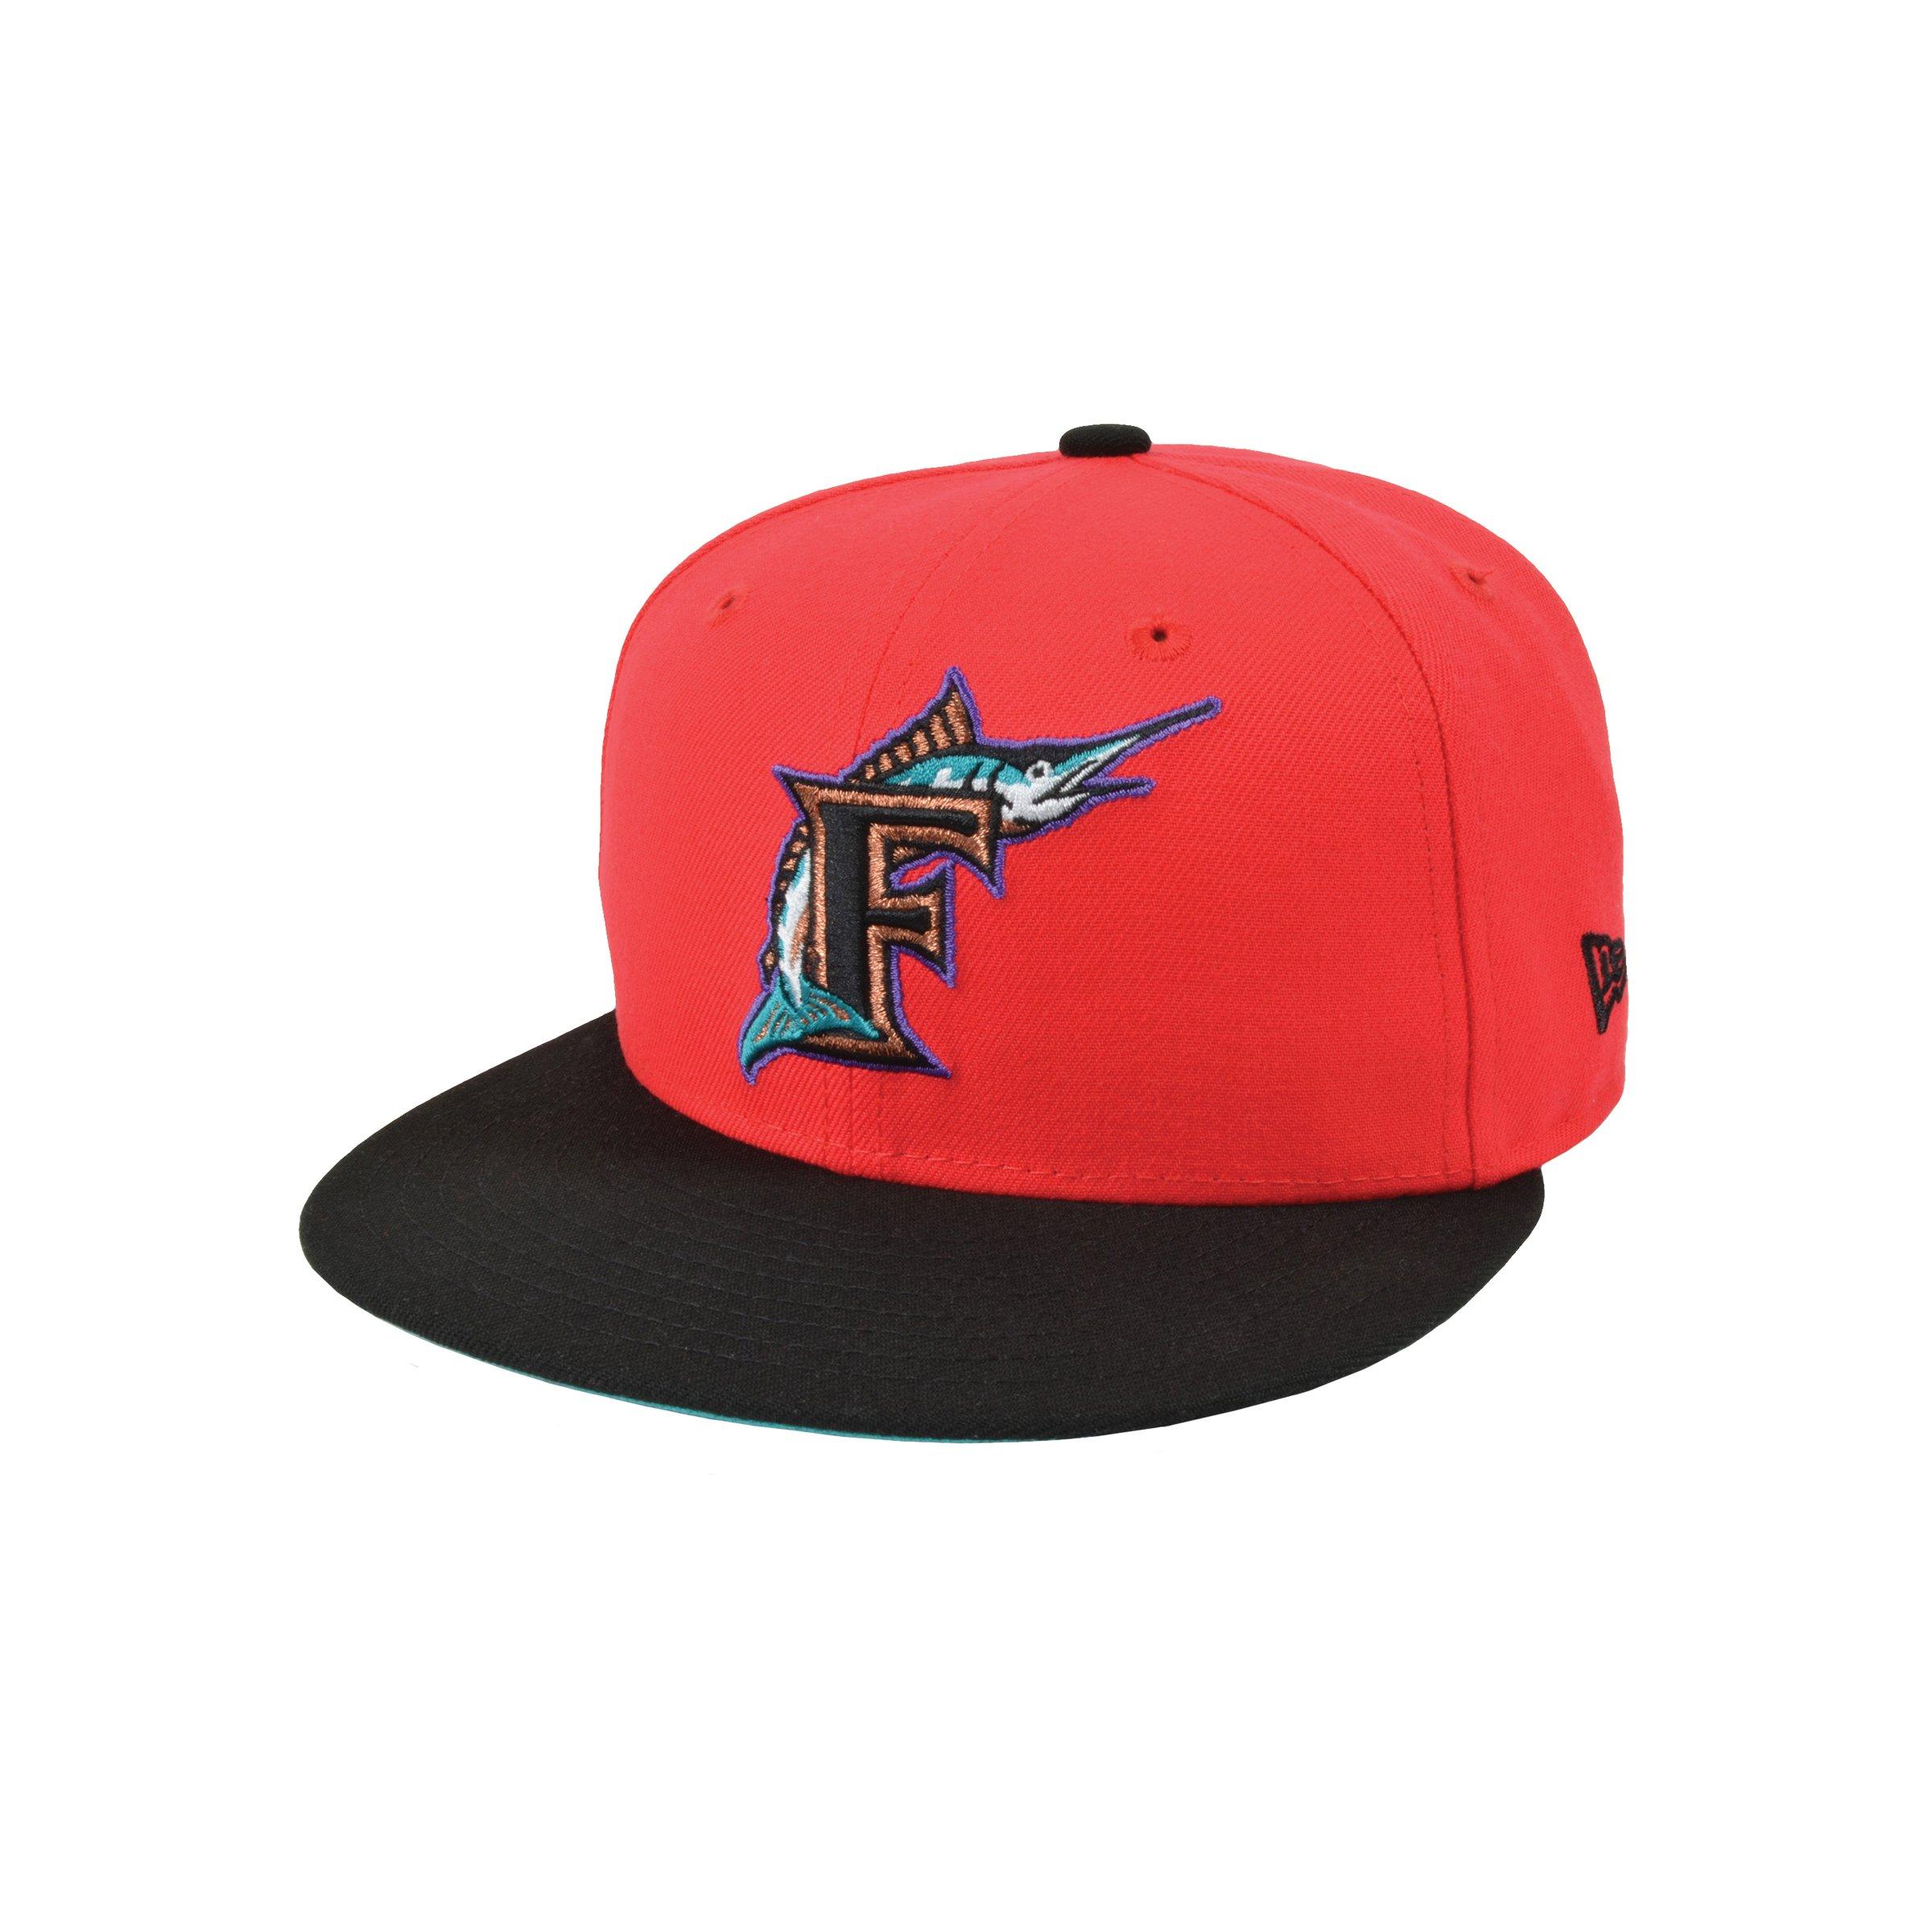 Miami Marlins on X: ⚠️NOW AVAILABLE⚠️ Teal Florida Marlins